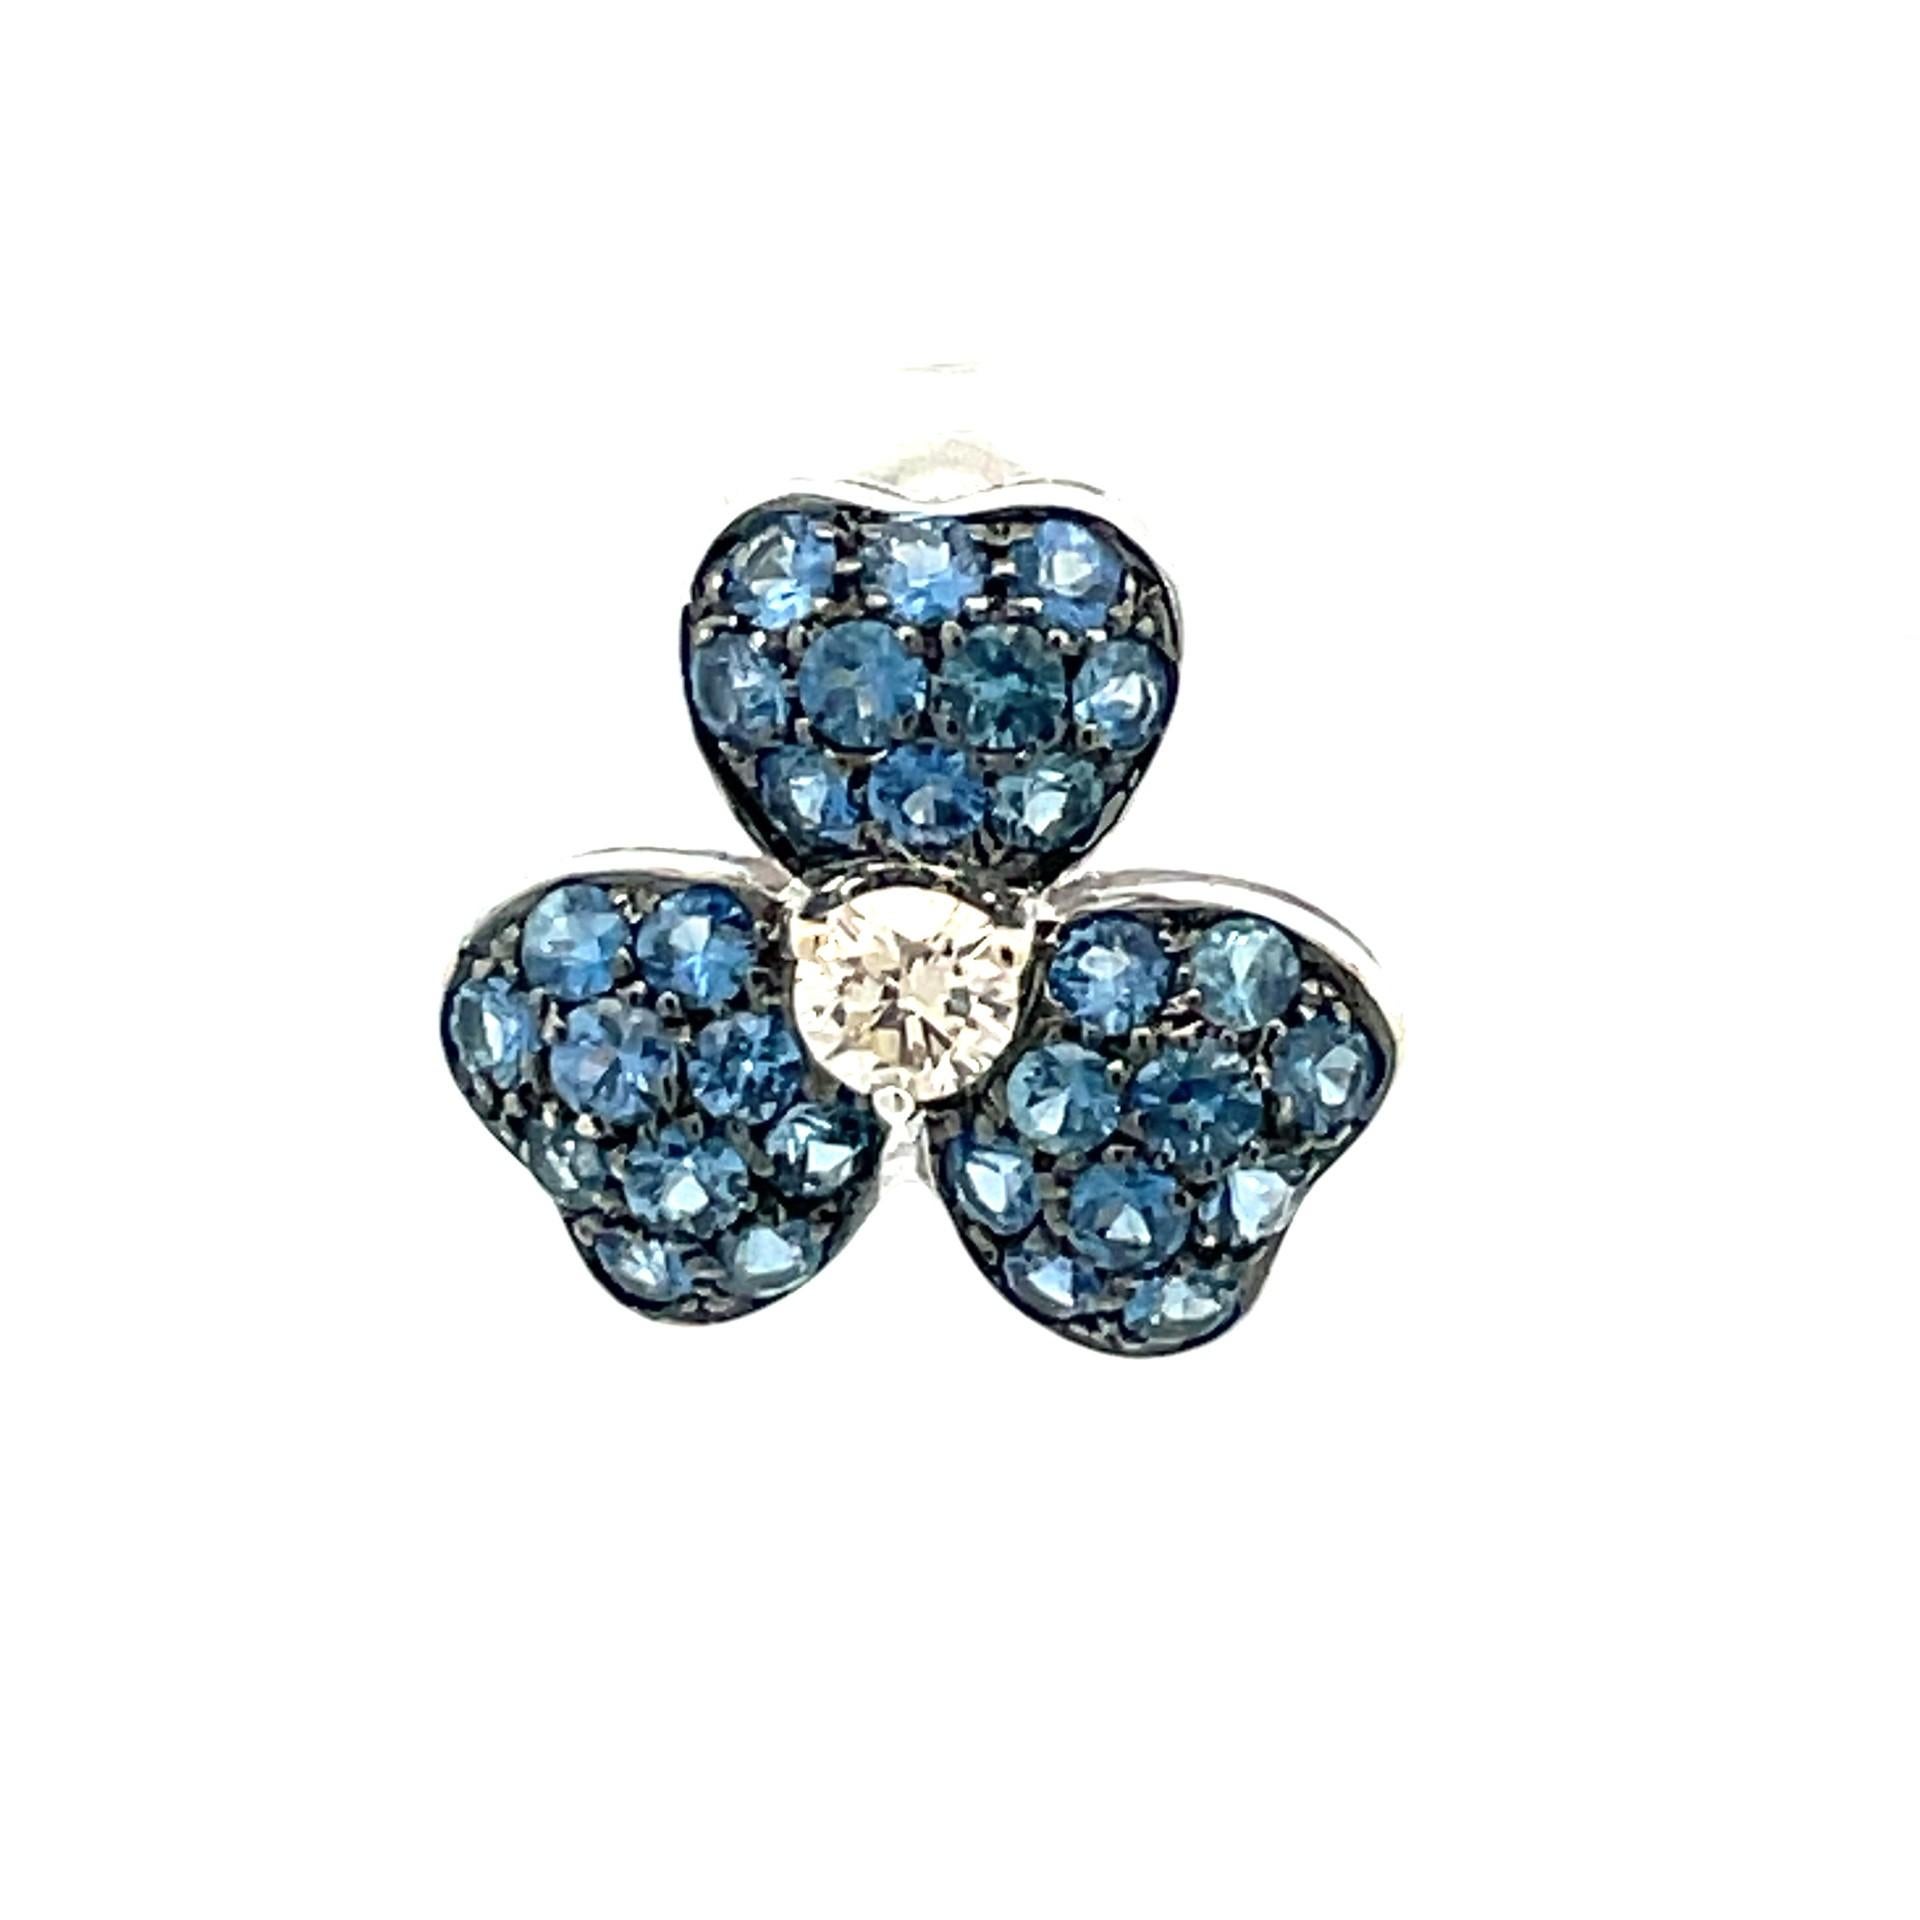 3 Leaf Clover Earring Set With Blue Sapphires and Diamonds 18kt White Gold In New Condition For Sale In Westmount, CA